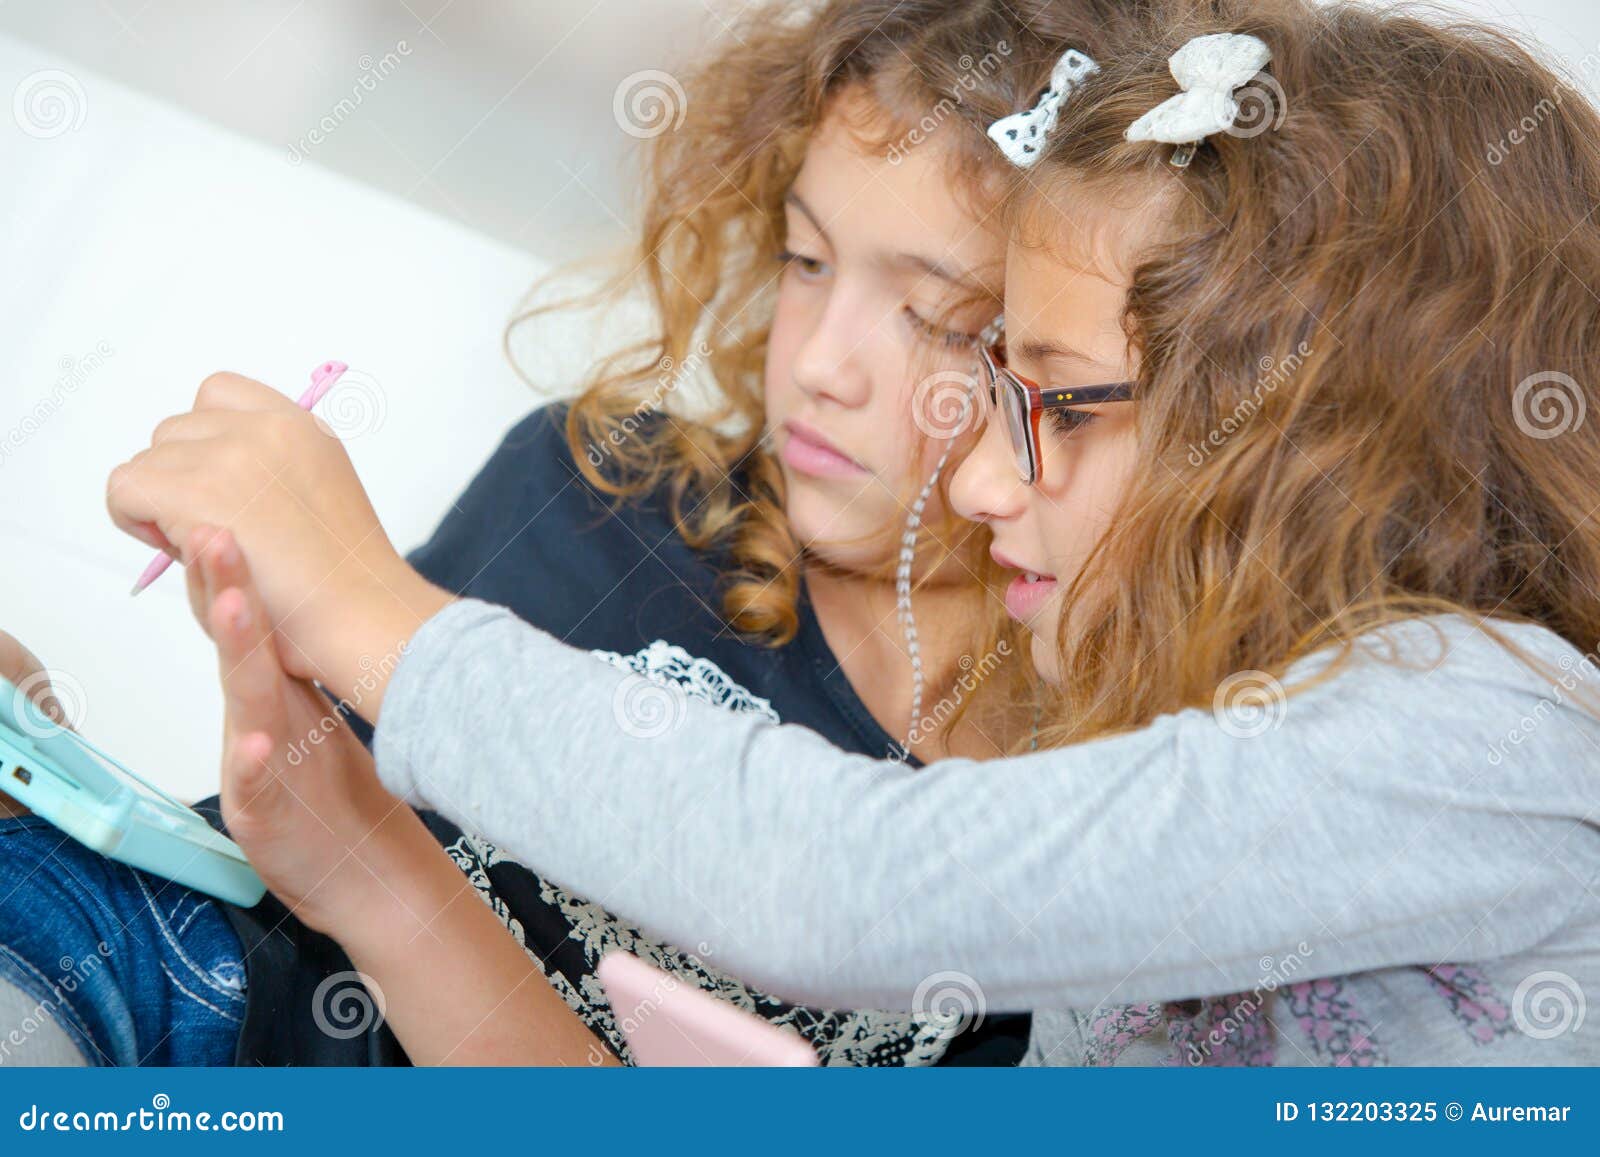 two young sisters playing video gales